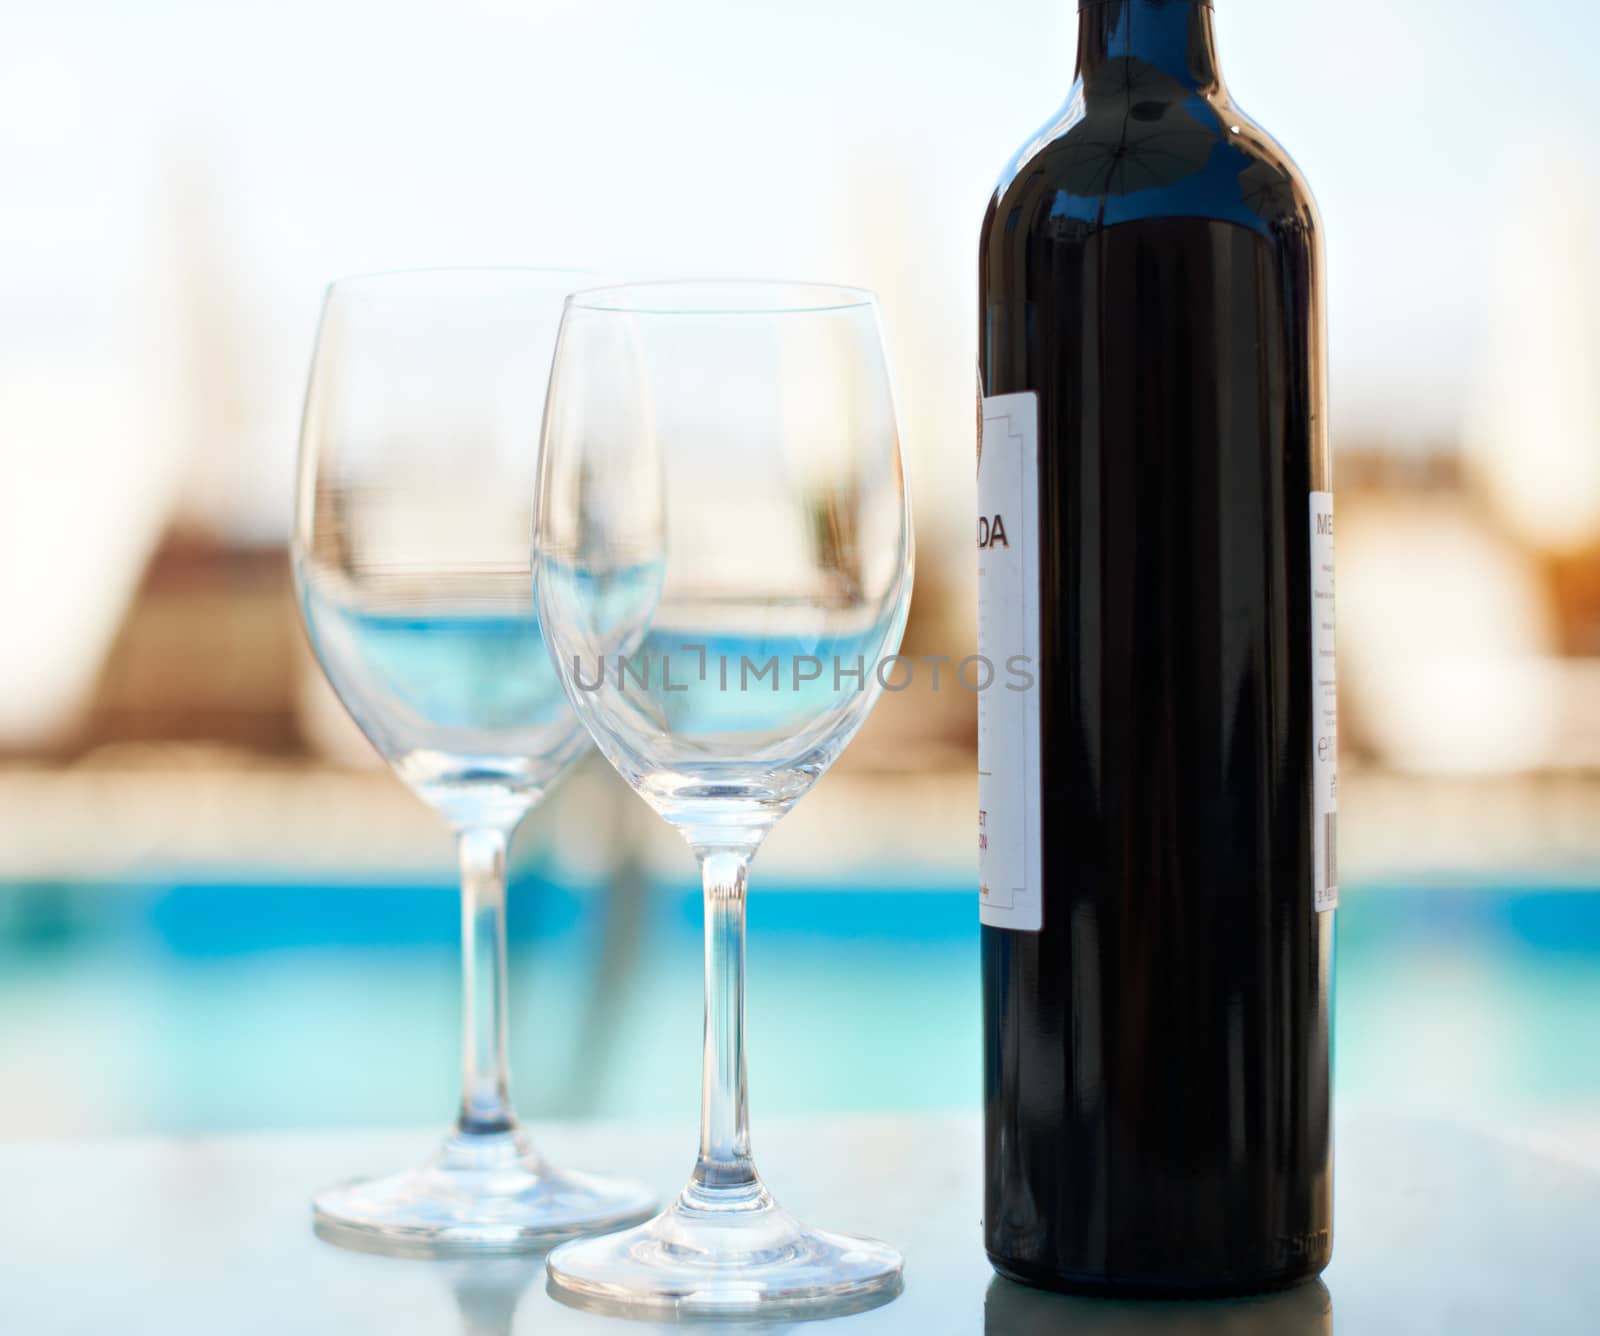 Wine bottle and glasses near sea water by ecobo